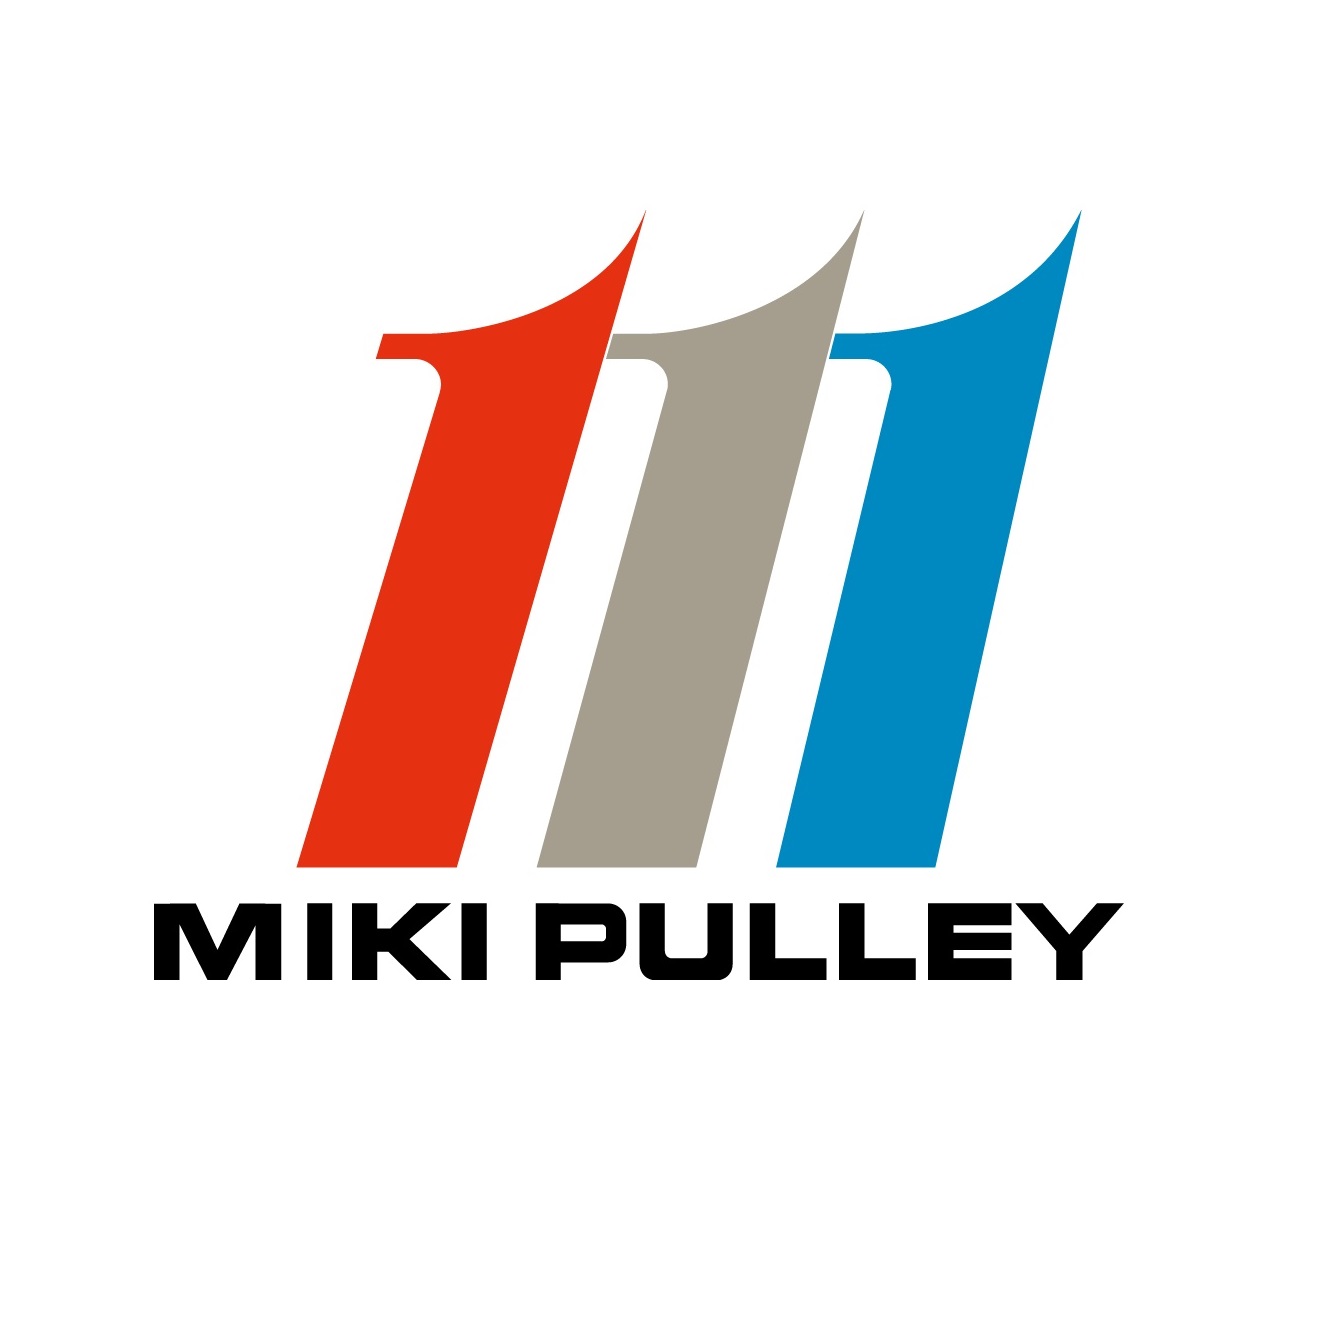 list-code-cua-khop-noi-miki-pulley.png